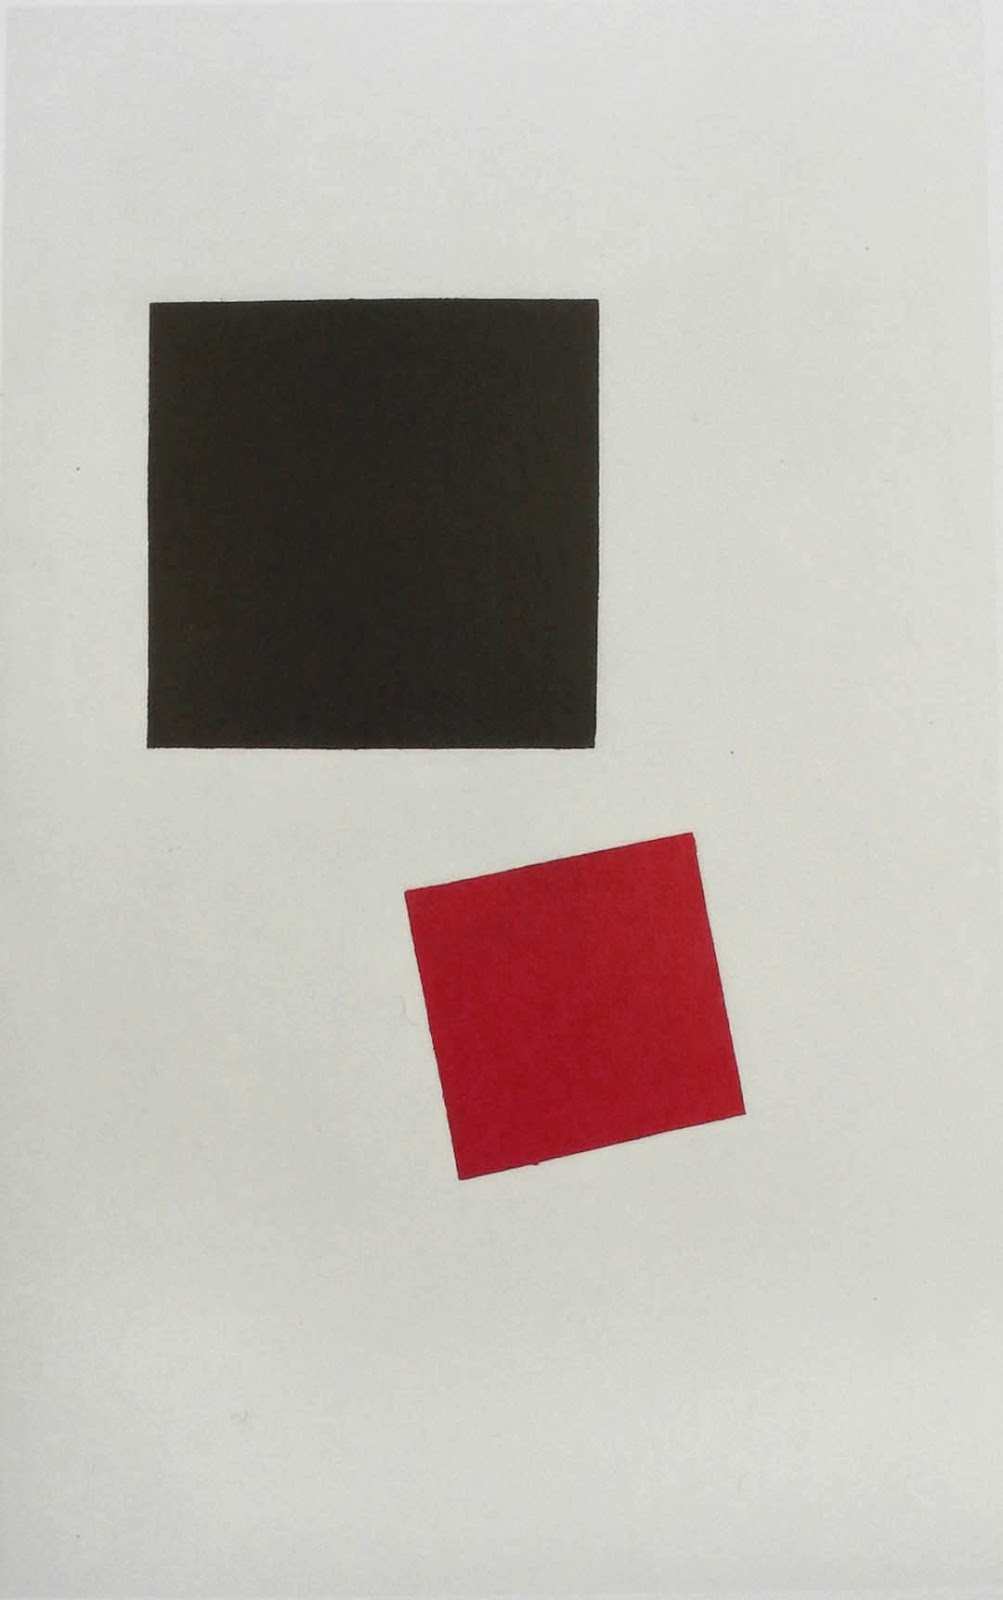 Painterly Realism of a Boy with a Knapsack Color Masses in the Fourth Dimension by Kazimir Malevich